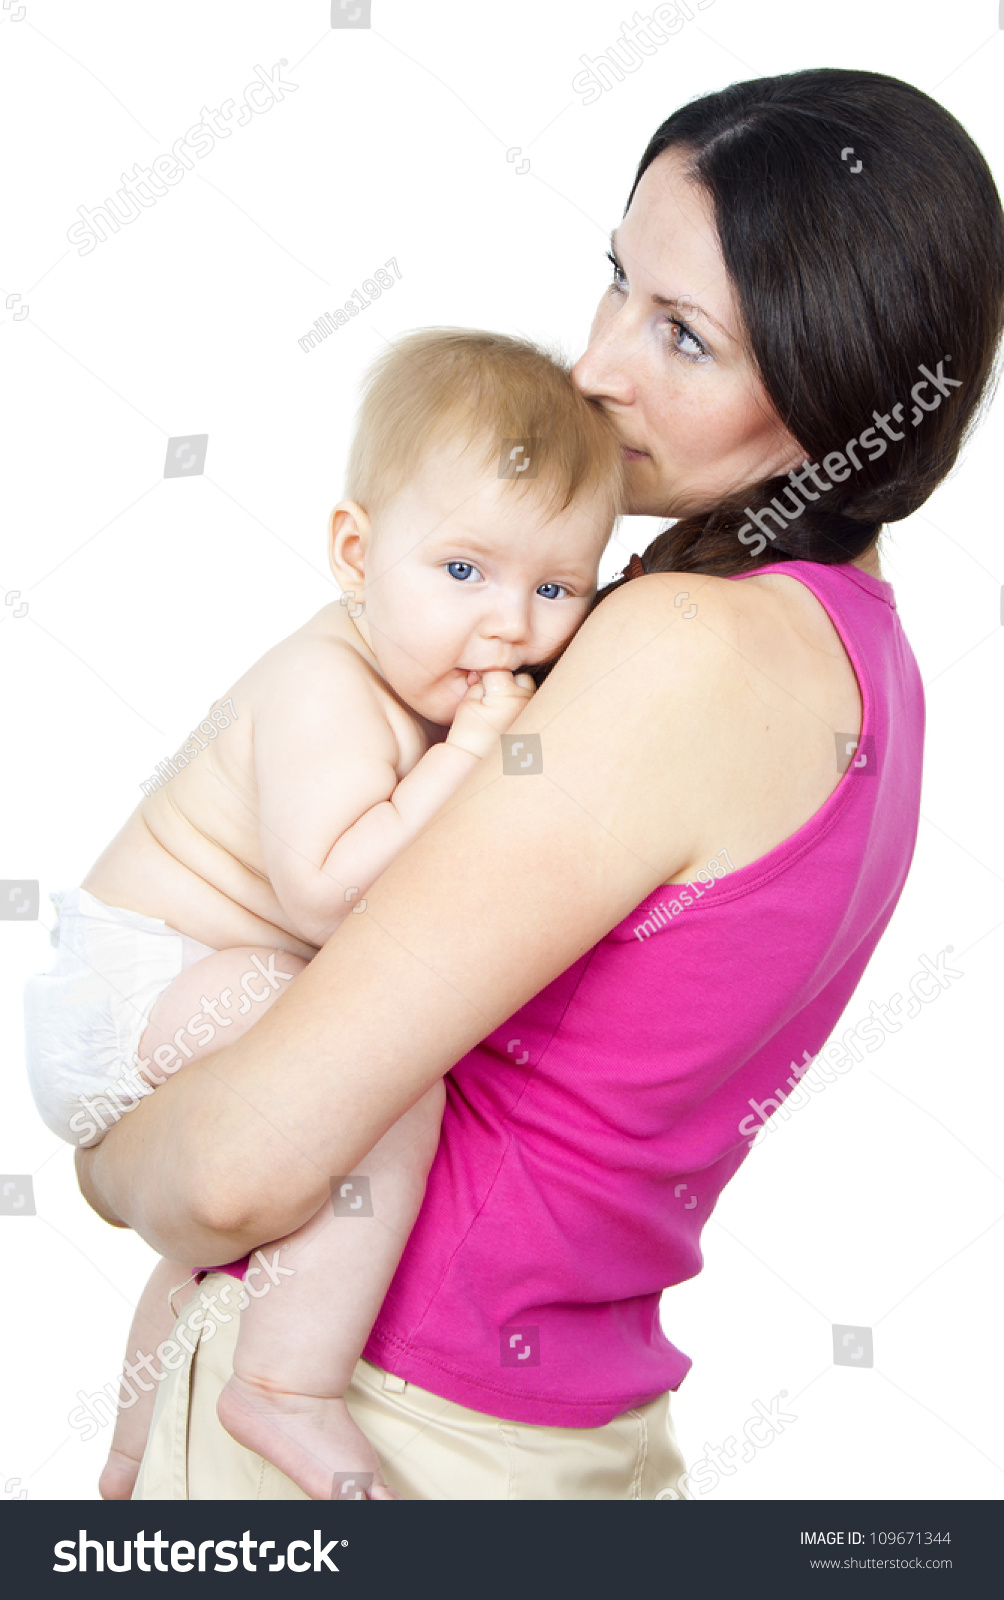 Beautiful Naked Mother Holding Baby In Her Arms Stock 